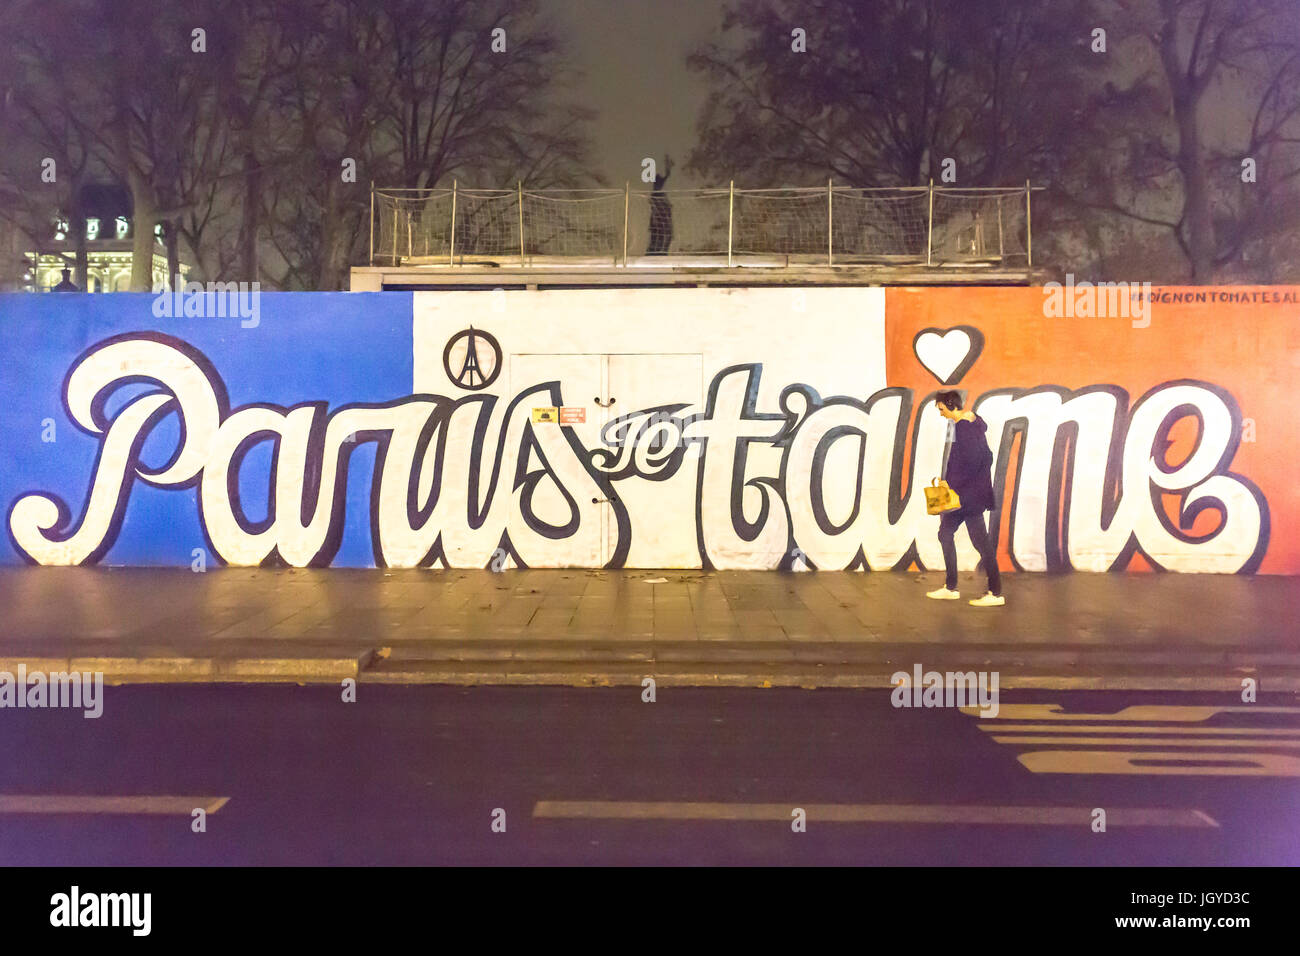 Painting place de la republique saying in blue white red: Paris je t'aime.. Homage at the victims of the terrorist attacks the 13th of november 2015. Stock Photo